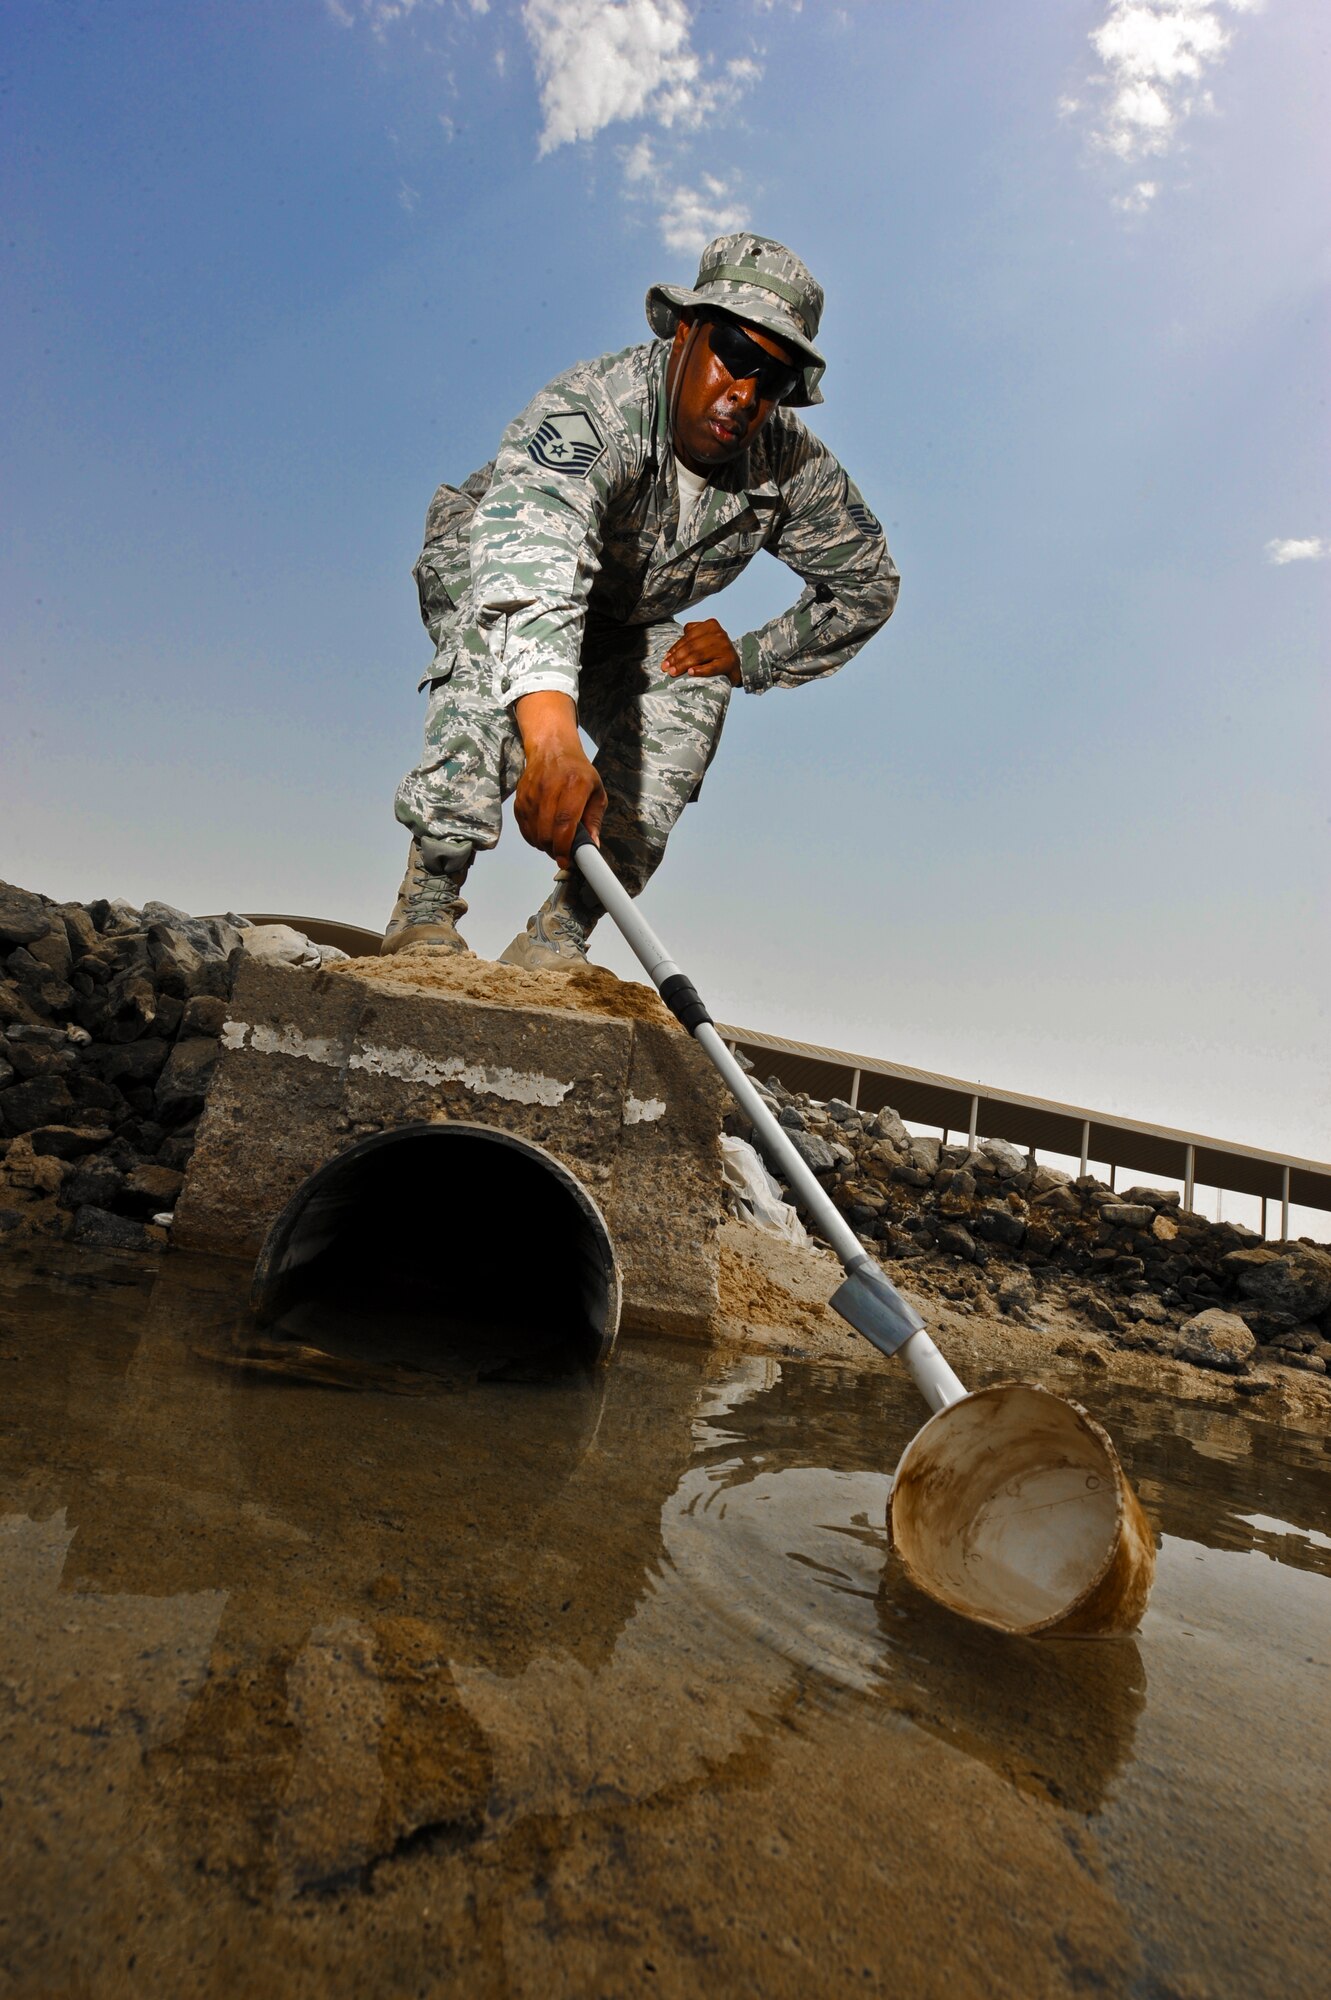 U.S. Air Force Master Sgt. Nathan Hanzy, 380th Expeditionary Medical Group NCO in charge of preventive medicine, takes a water sample from a water hole at an undisclosed location in Southwest Asia July 16, 2013. The water is tested for mosquito larva, if larva are present Hanzy will work with entomology to kill off the larva before they spawn. Hanzy is native to Gray, La., and is deployed from Offutt Air Force Base, Neb. (U.S. Air Force photo by Staff Sgt. Joshua J. Garcia)